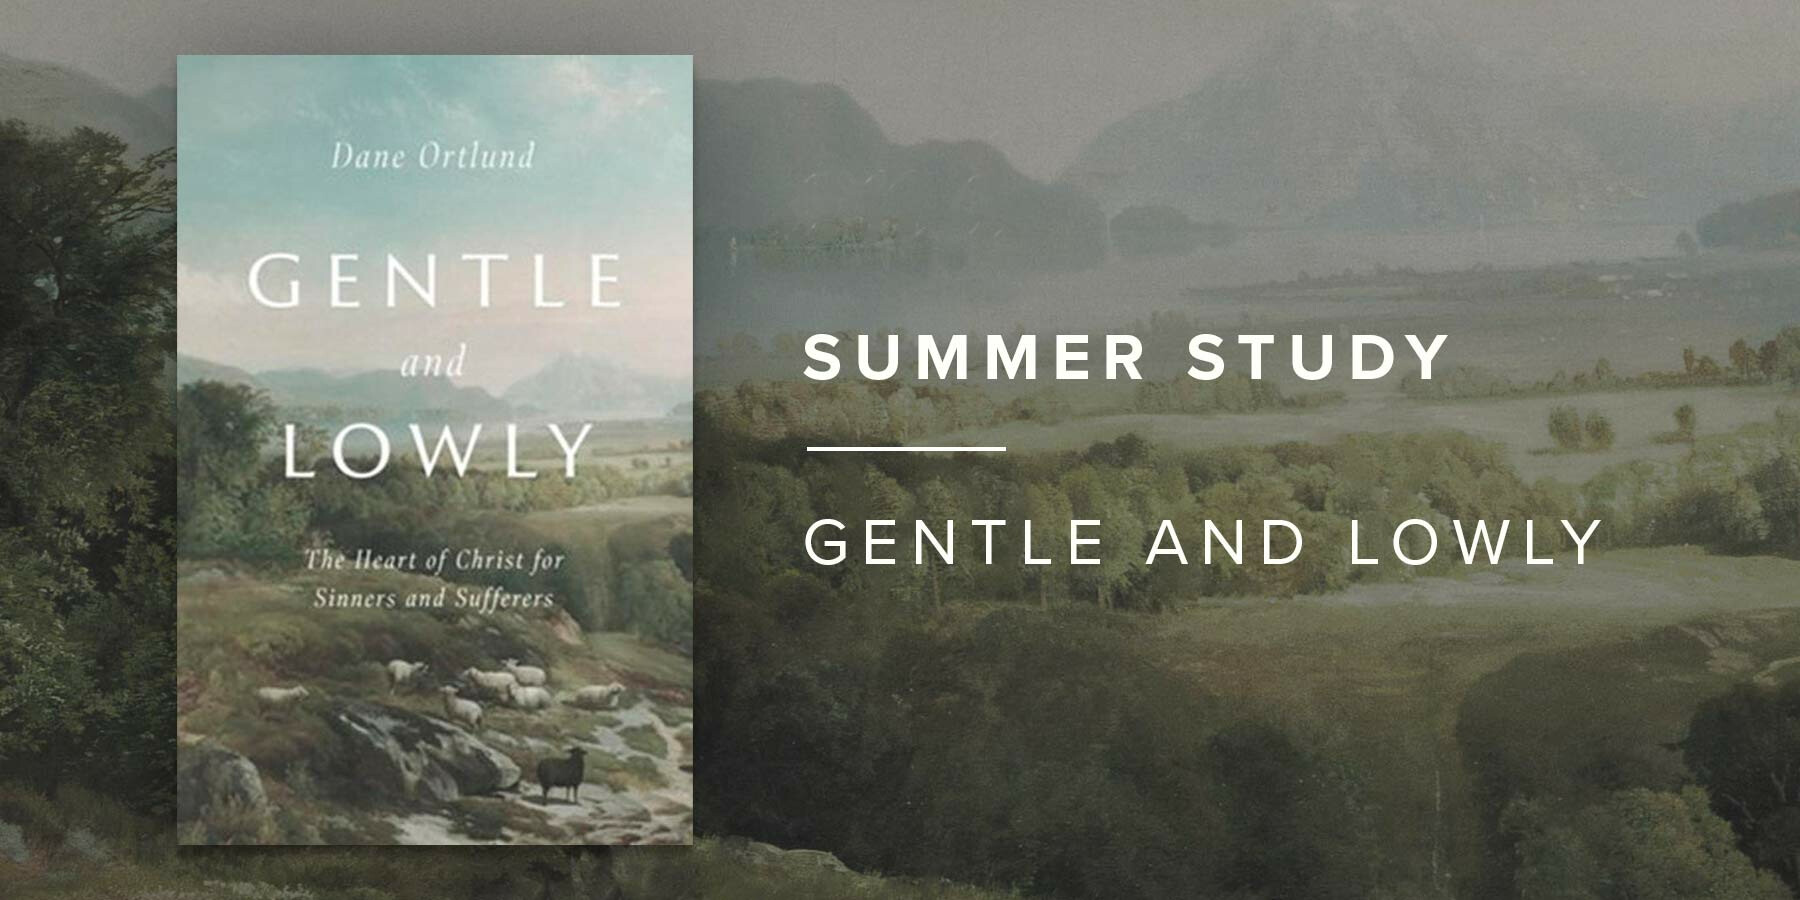 Summer Study: "Gentle and Lowly"